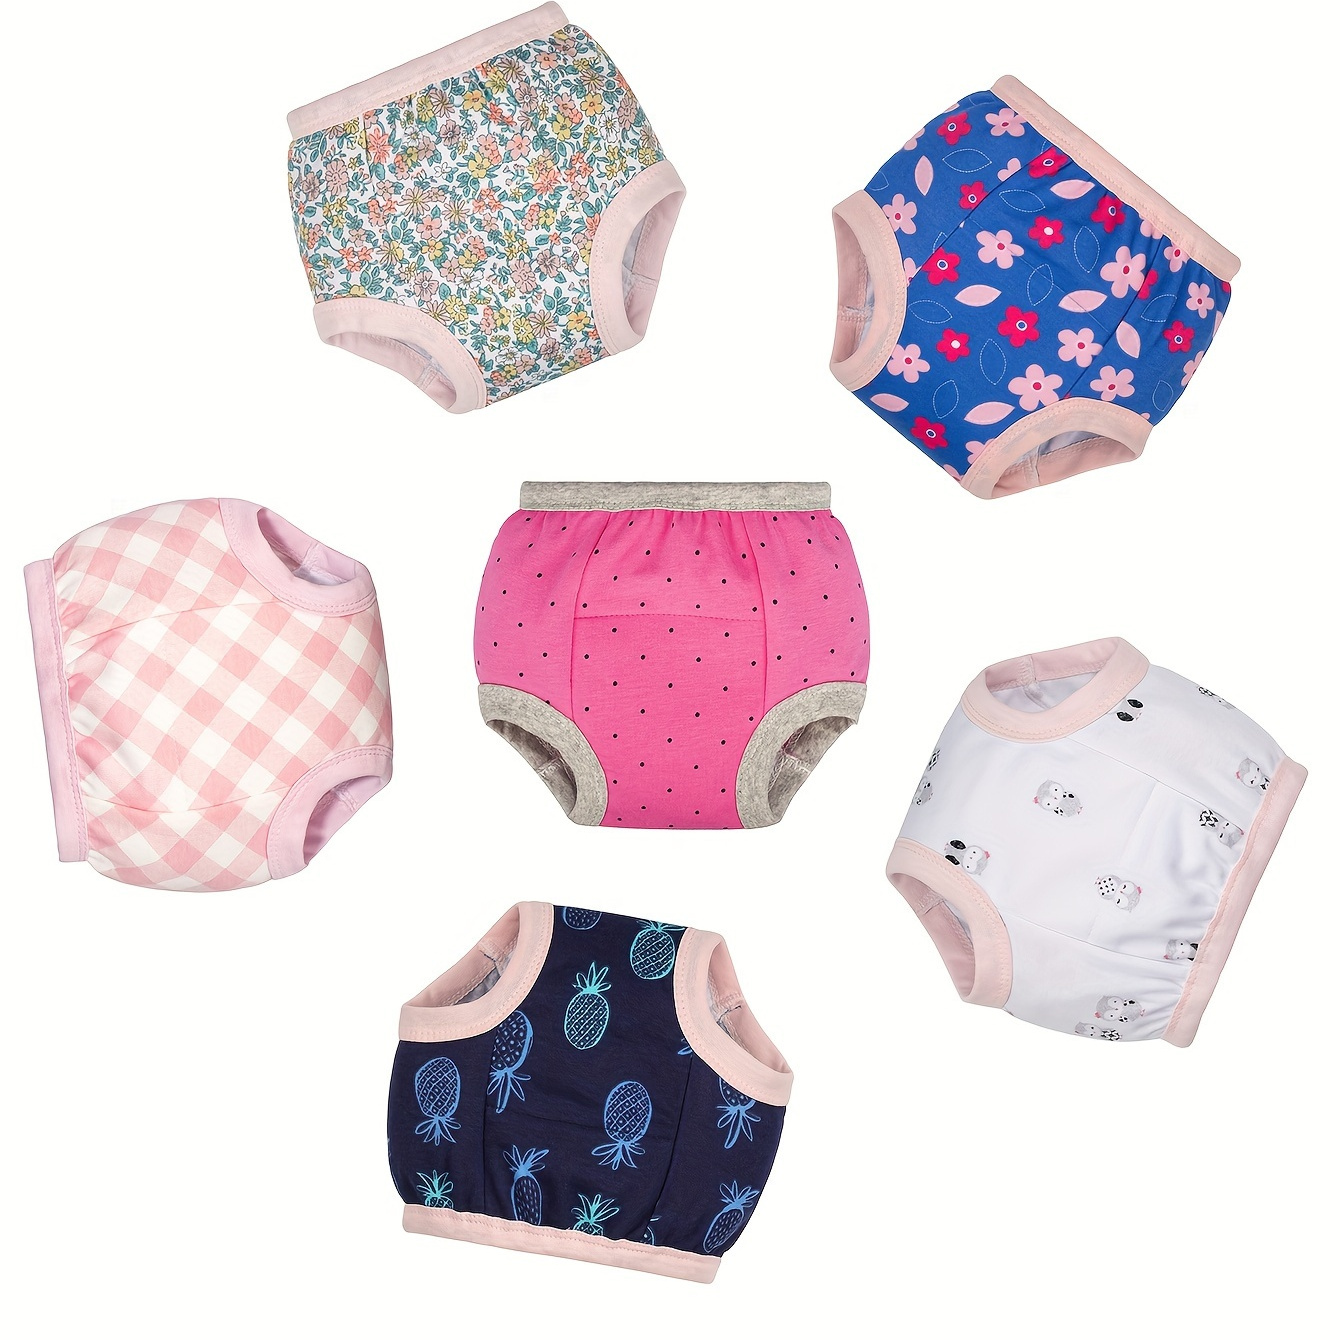 

6-pack Potty Training Pants For Baby Girl' 100% Cotton Waterproof Training Underwear